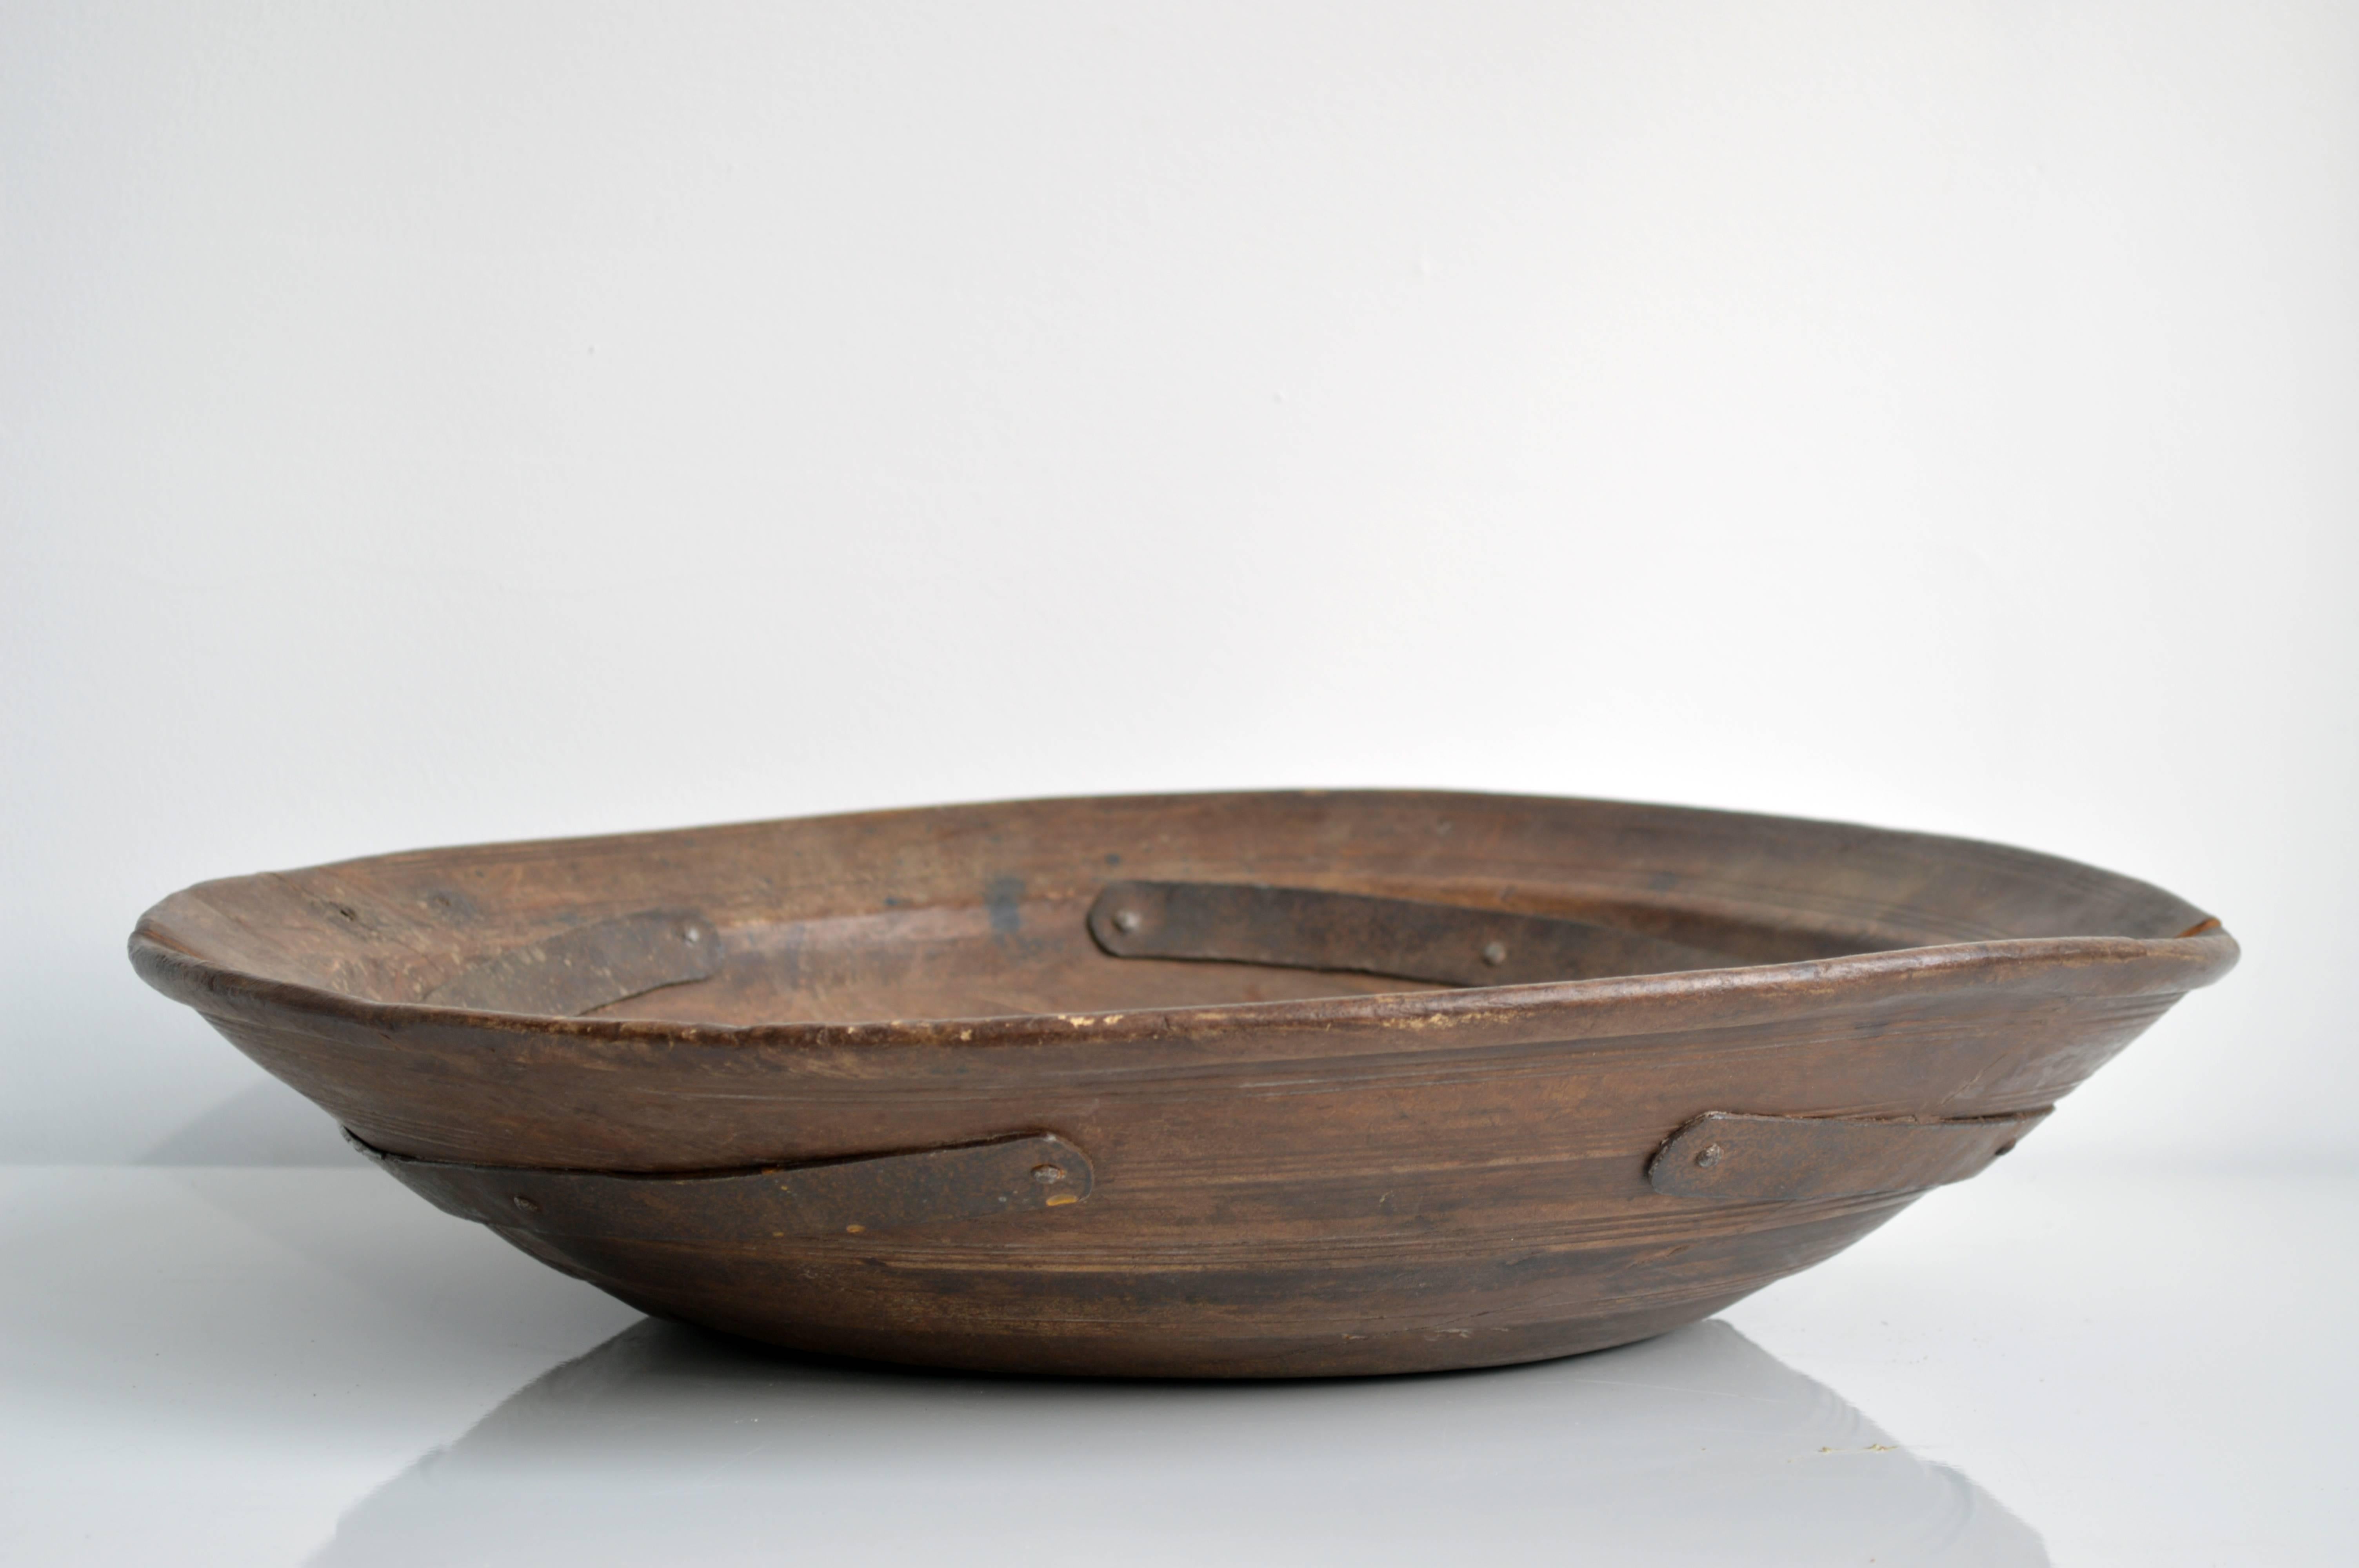 Rustic carved wood bowl, originally from Iran. This piece would make for a beautiful decorative display vessel in any home. The bowl has some cracks, secured by metal supports.